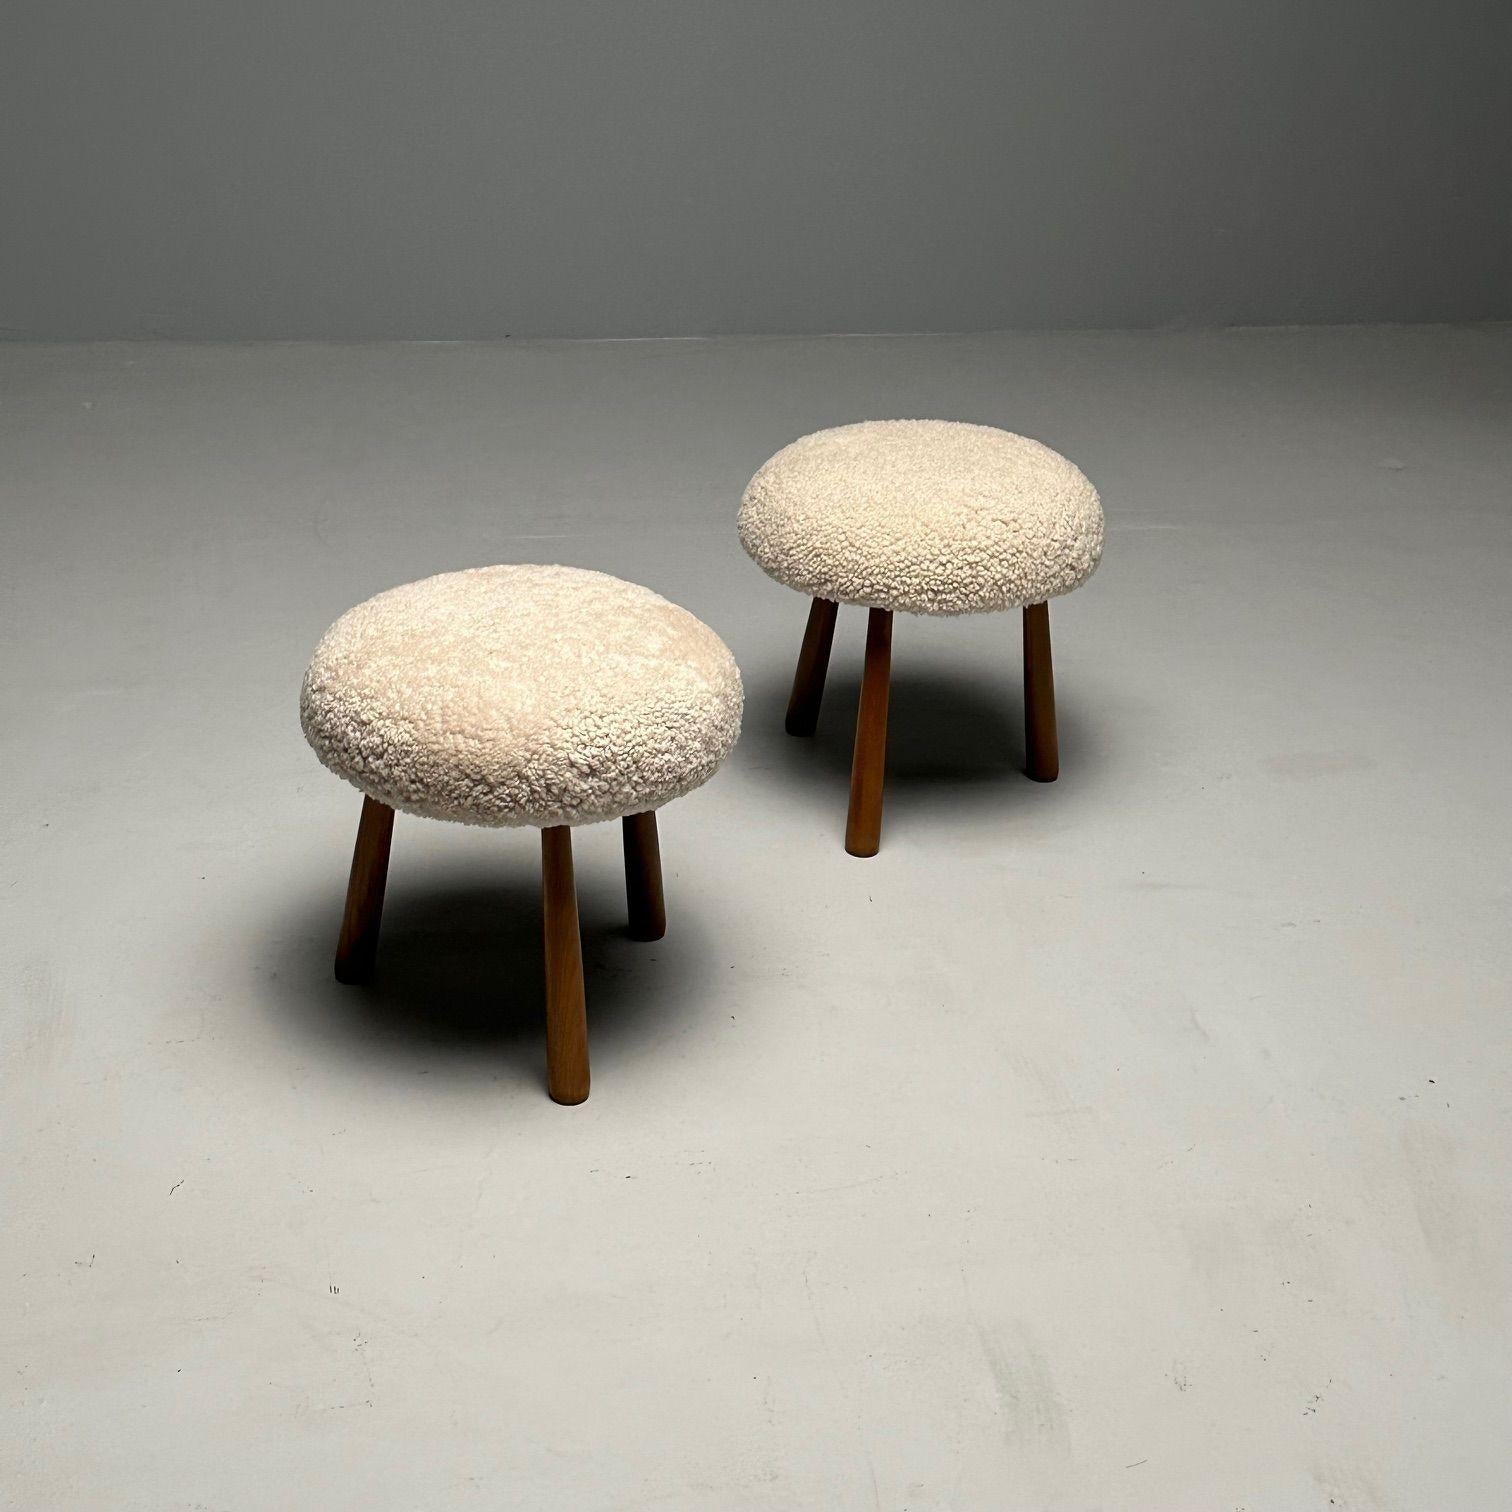 Pair Contemporary Sheepskin Stools / Ottomans, Swedish Modern Style, Shearling In Good Condition For Sale In Stamford, CT